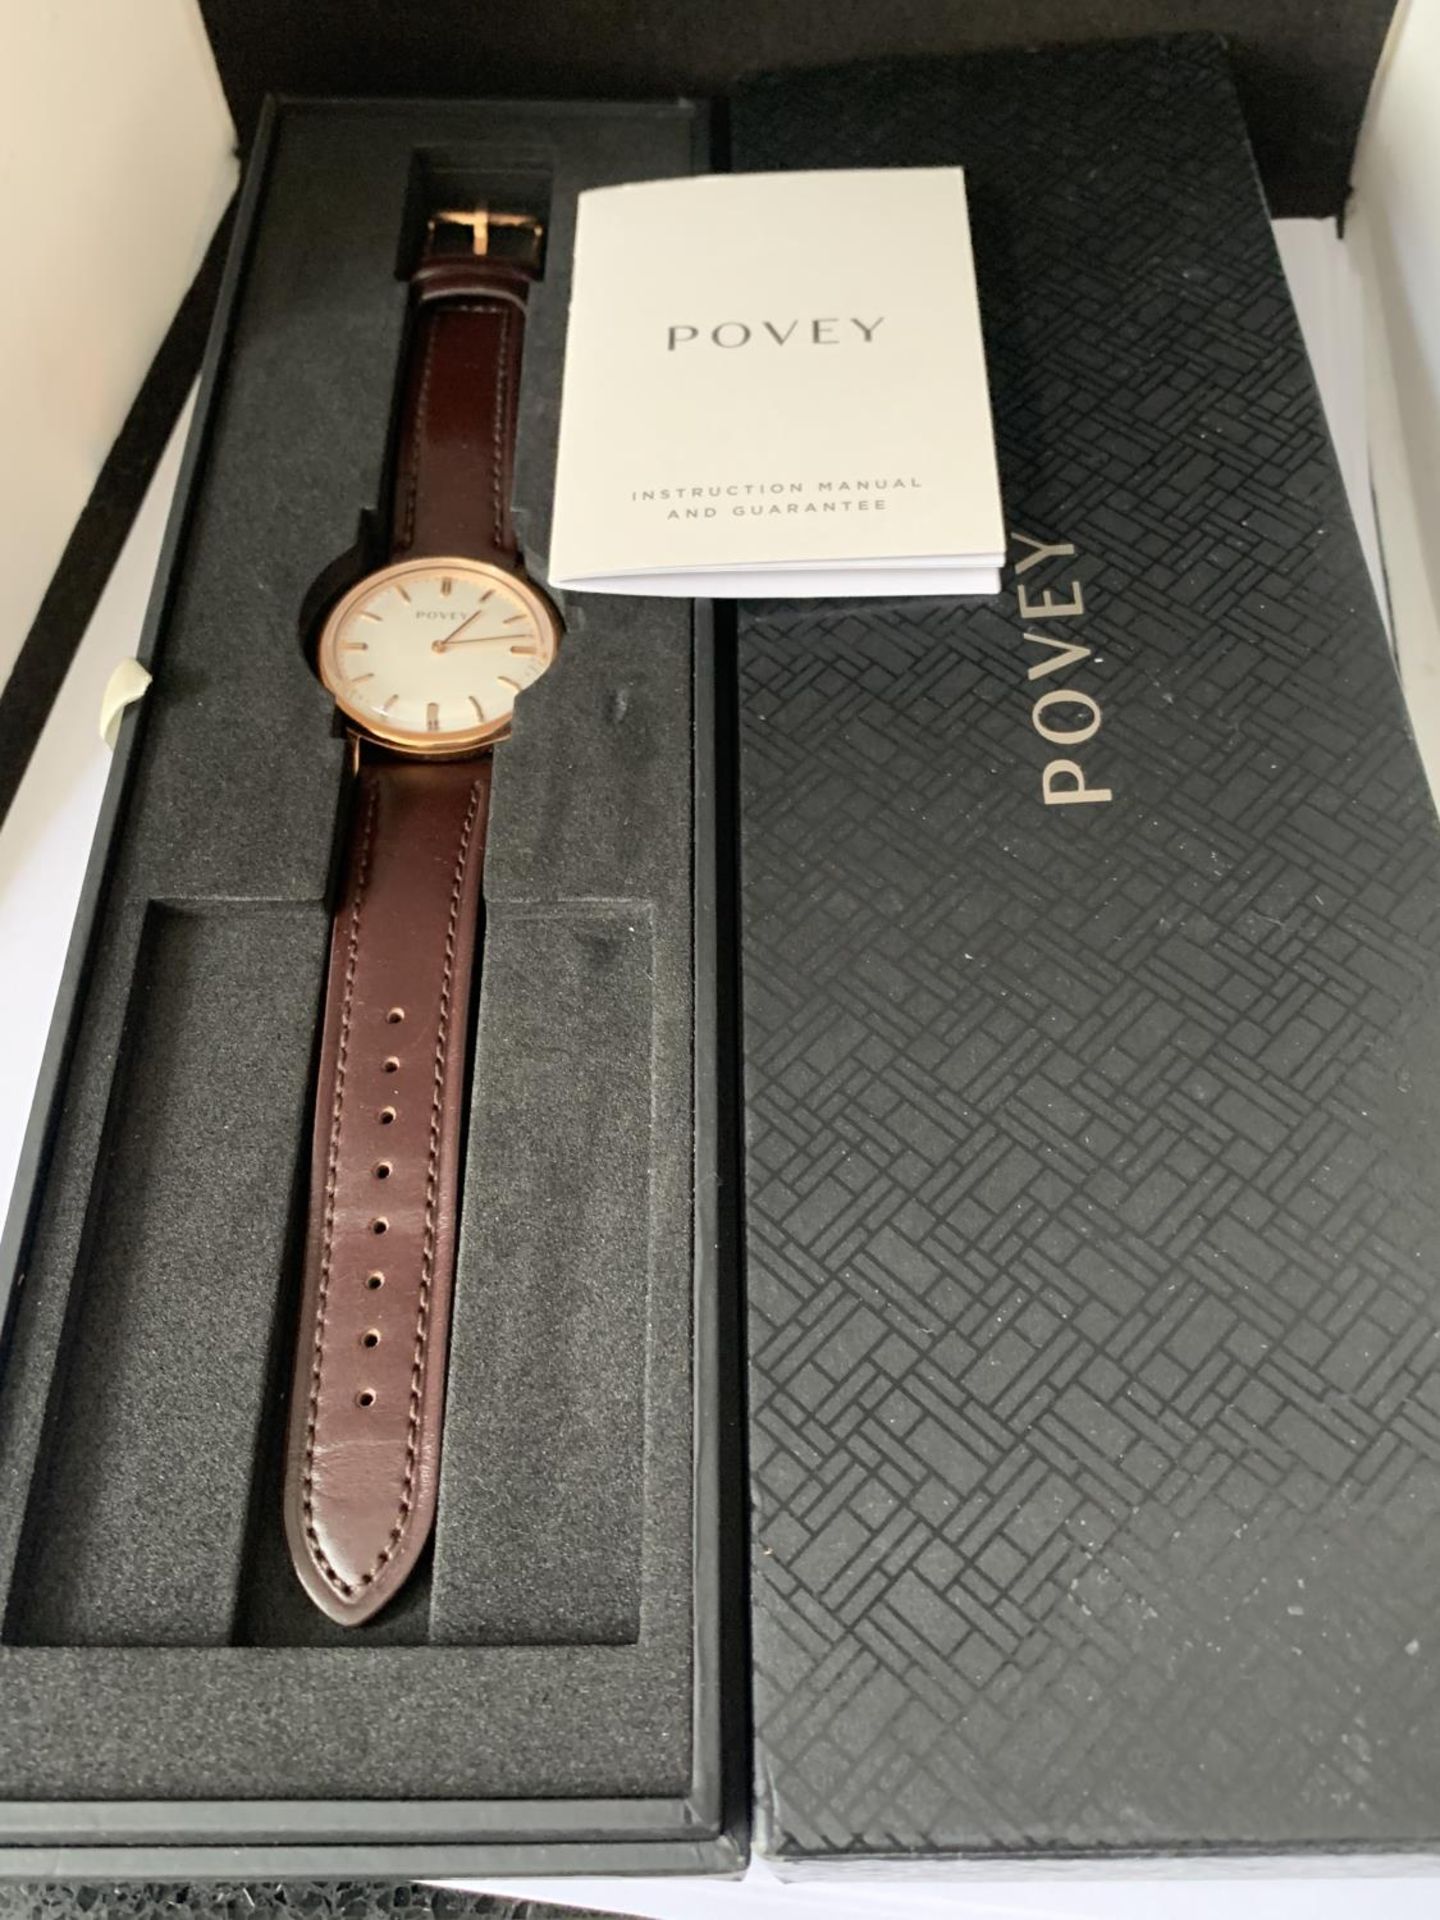 AN AS NEW AND BOXED POVEY WRIST WATCH SEEN WORKING BUT NO WARRANTY